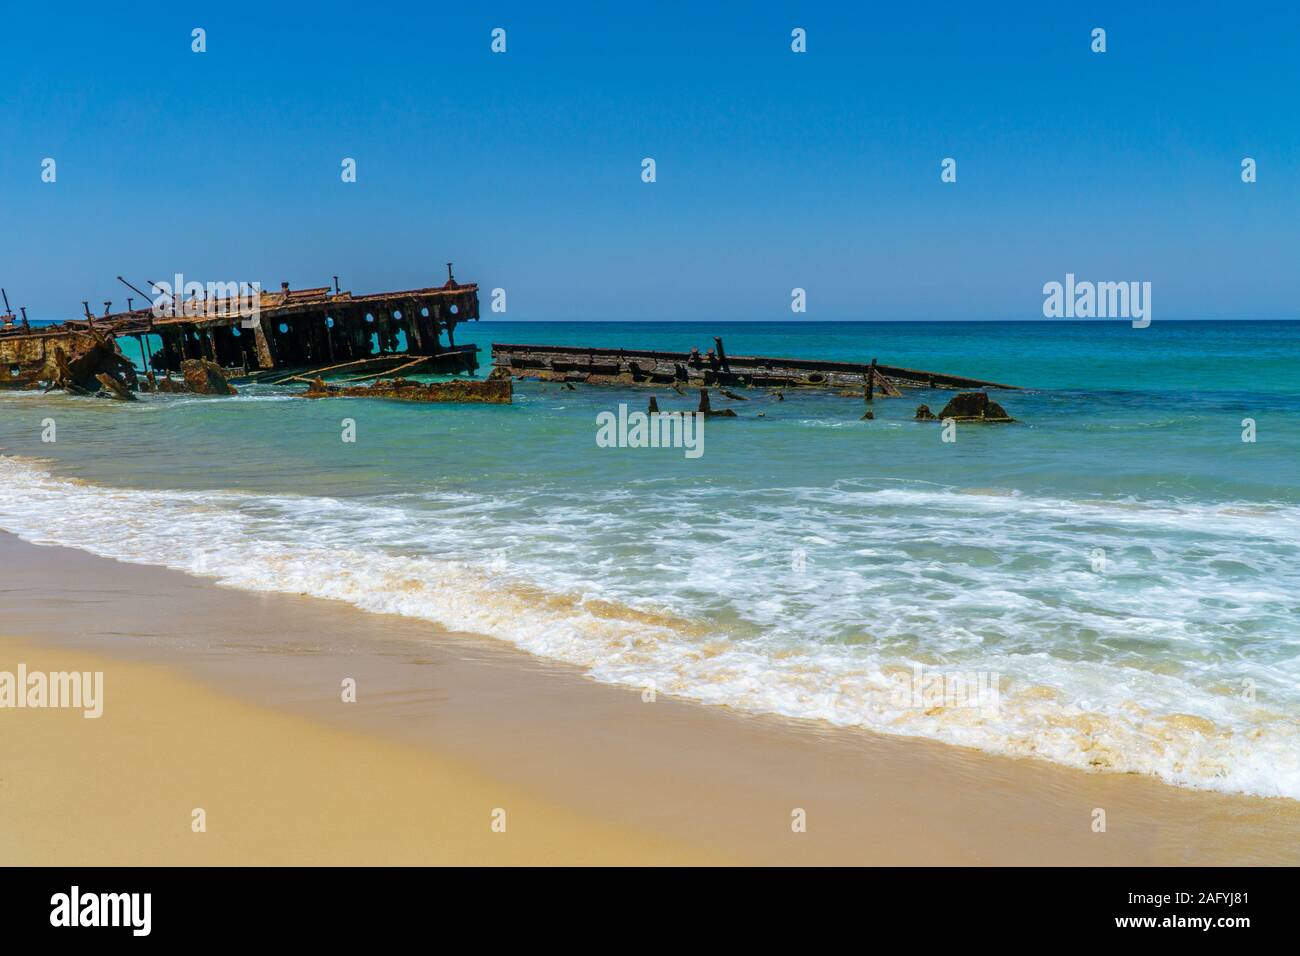 on the beach of fraser island lies the skeleton of a washed-up shipwreck in fine weather Stock Photo